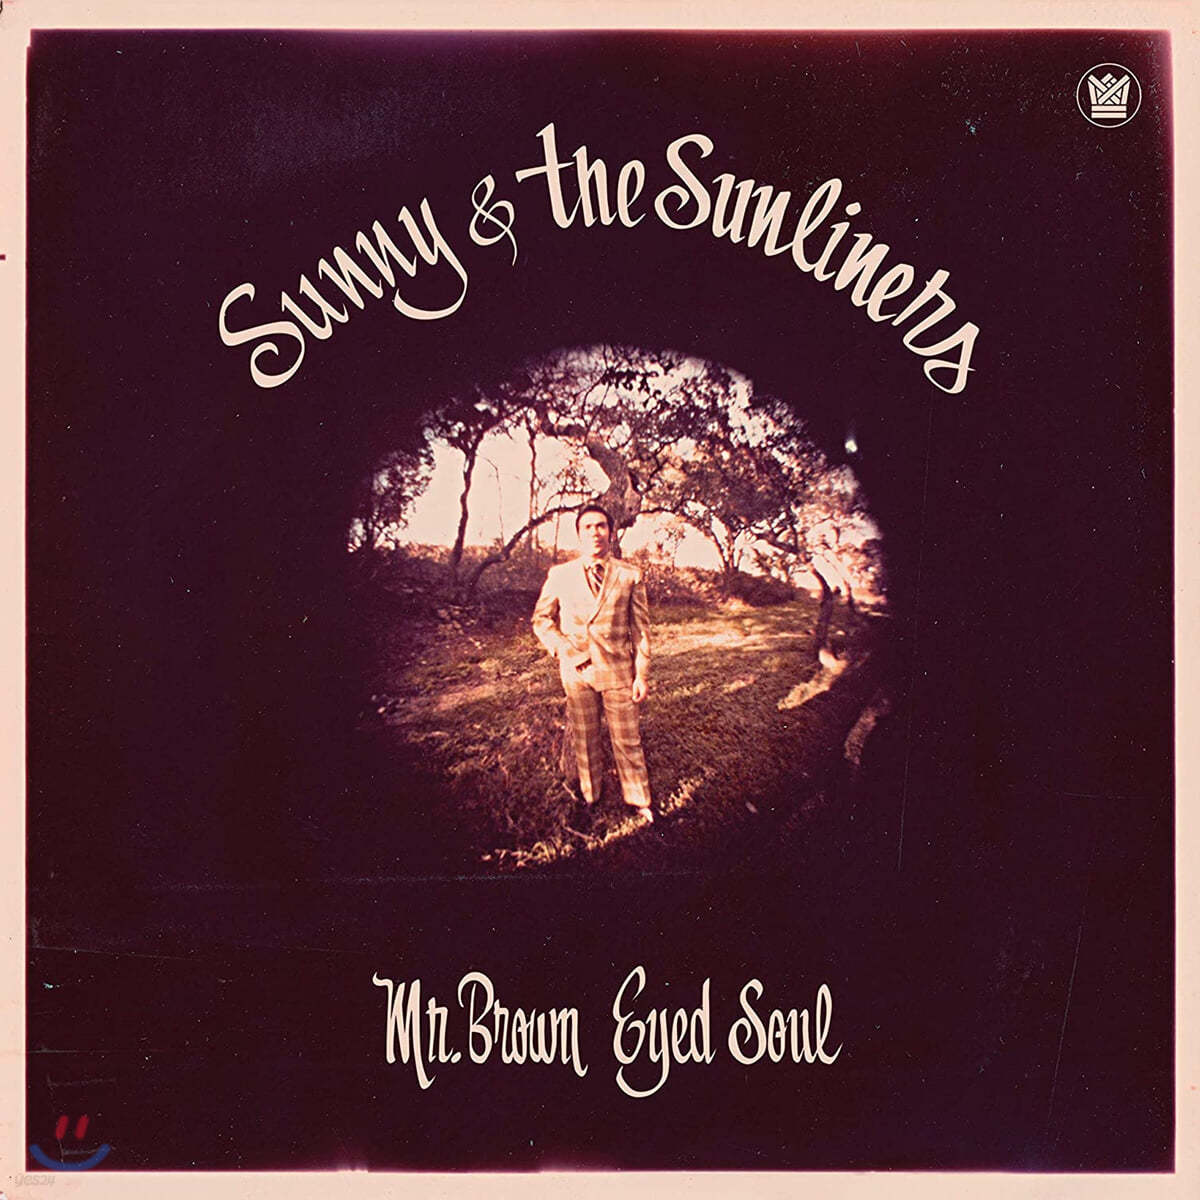 Sunny & The Sunliners (써니 앤 썬라이너스) - Mr Brown Eyed Soul [LP] 